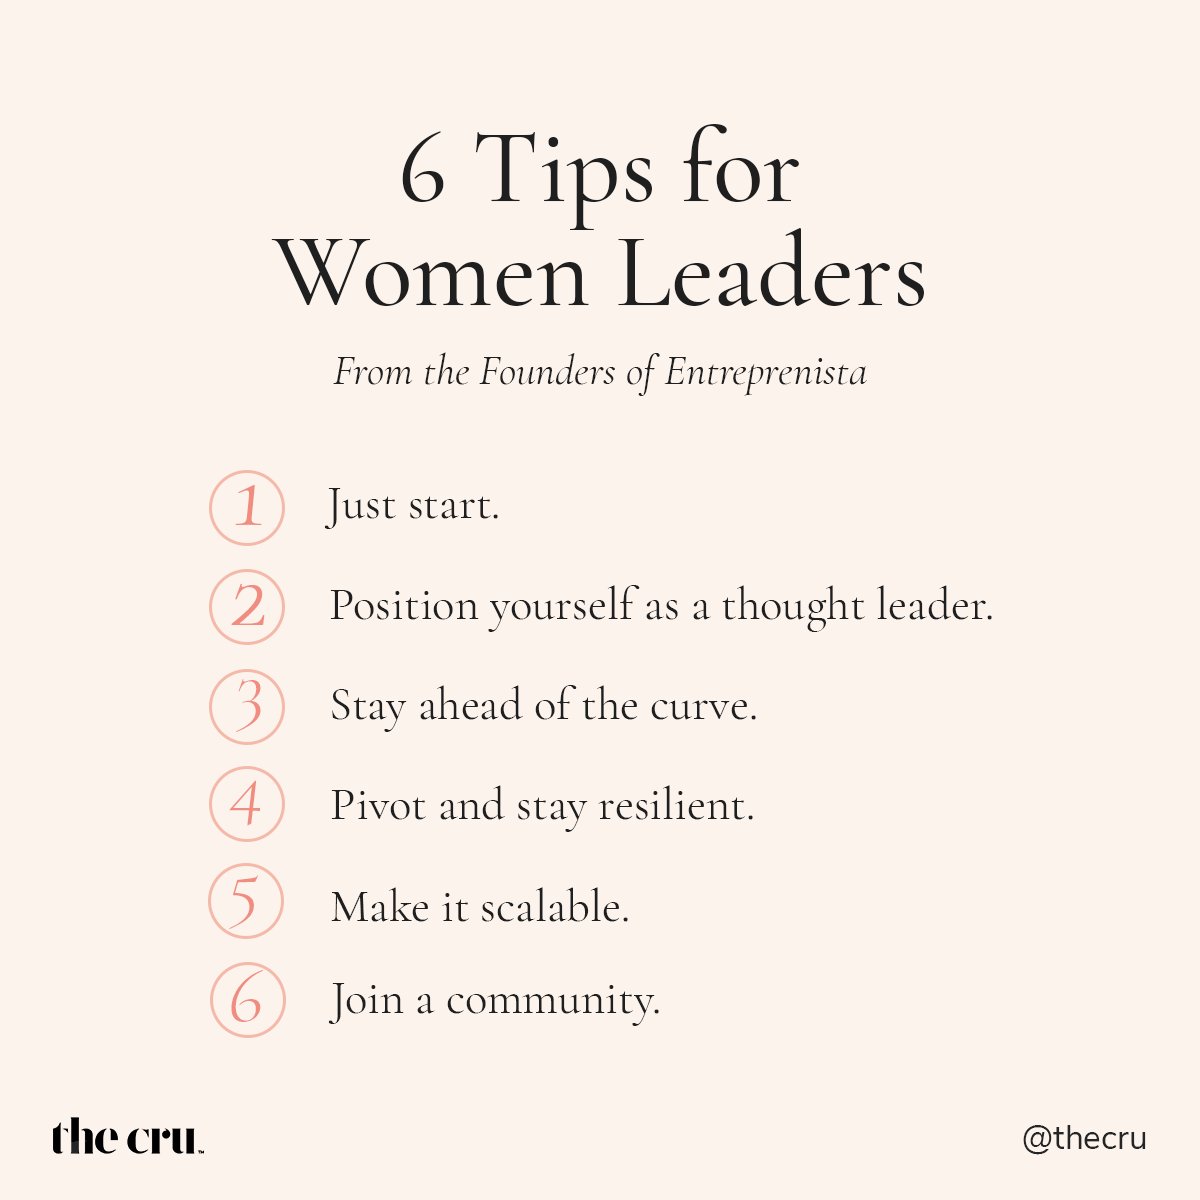 If you are a woman, you are a leader. So, which one of these tips are you going to be putting into practice?